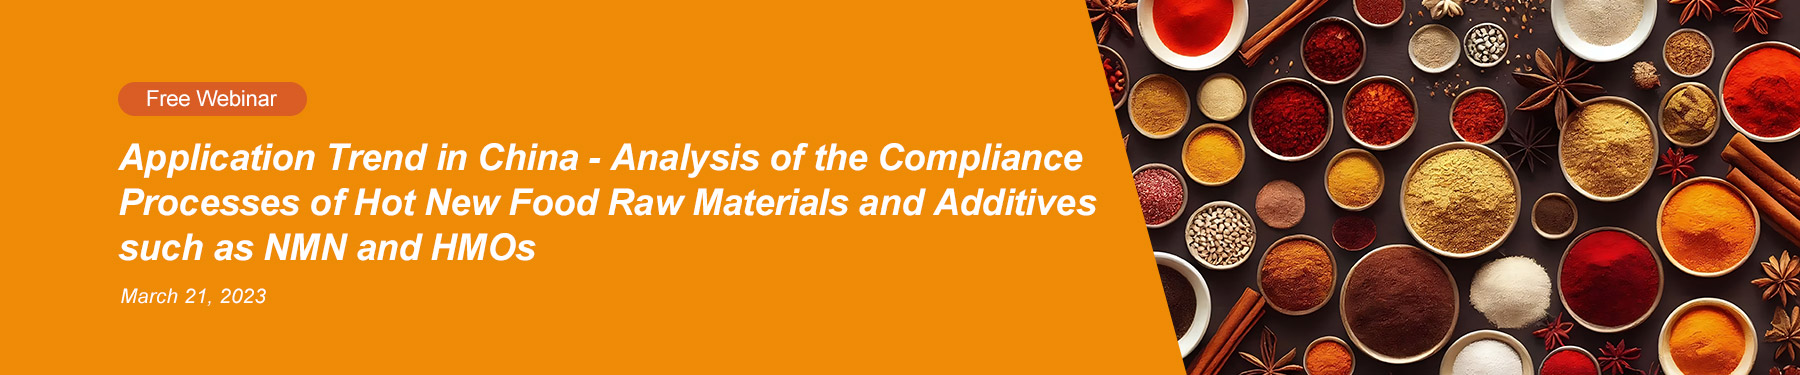 https://www.cirs-group.com/en/food/free-webinar-application-trend-in-china-analysis-of-the-compliance-processes-of-hot-new-food-raw-materials-and-additives-such-as-nmn-and-hmos